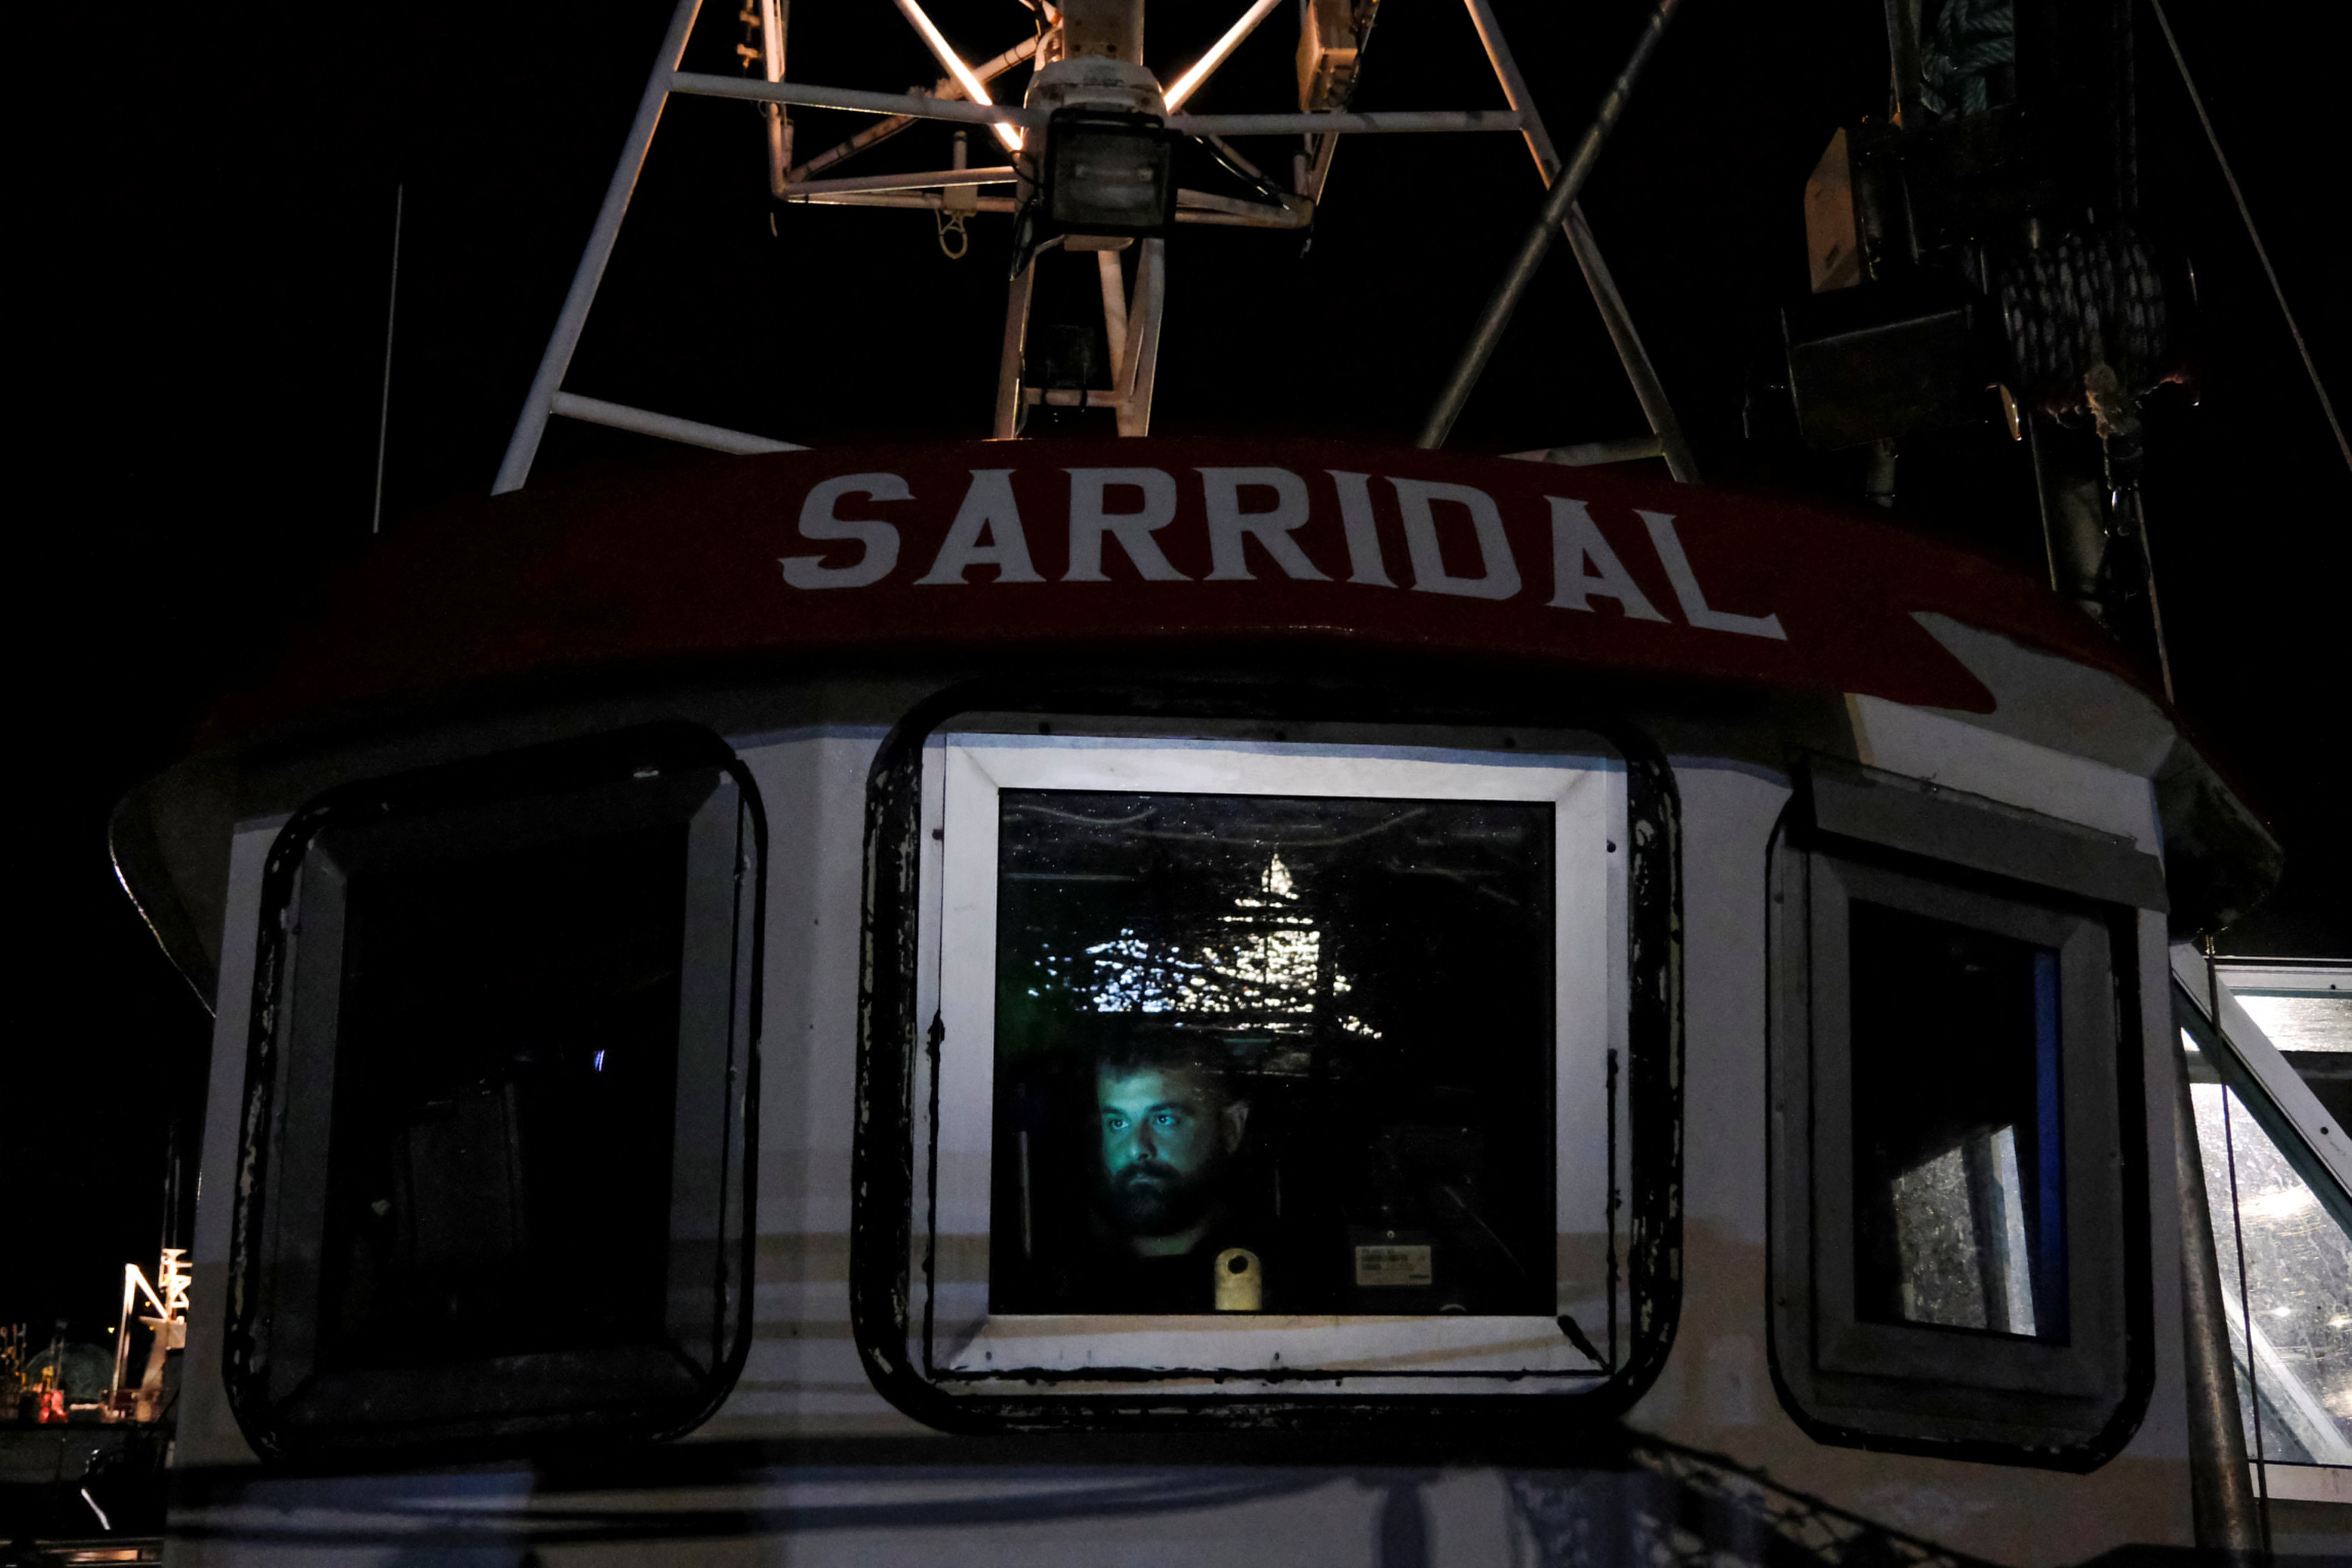 Captain Francisco Gonzalez looks at a map inside the Sarridal ship before a fishing outing to the Atlantic Ocean, at Cedeira’s port, Galicia, Spain